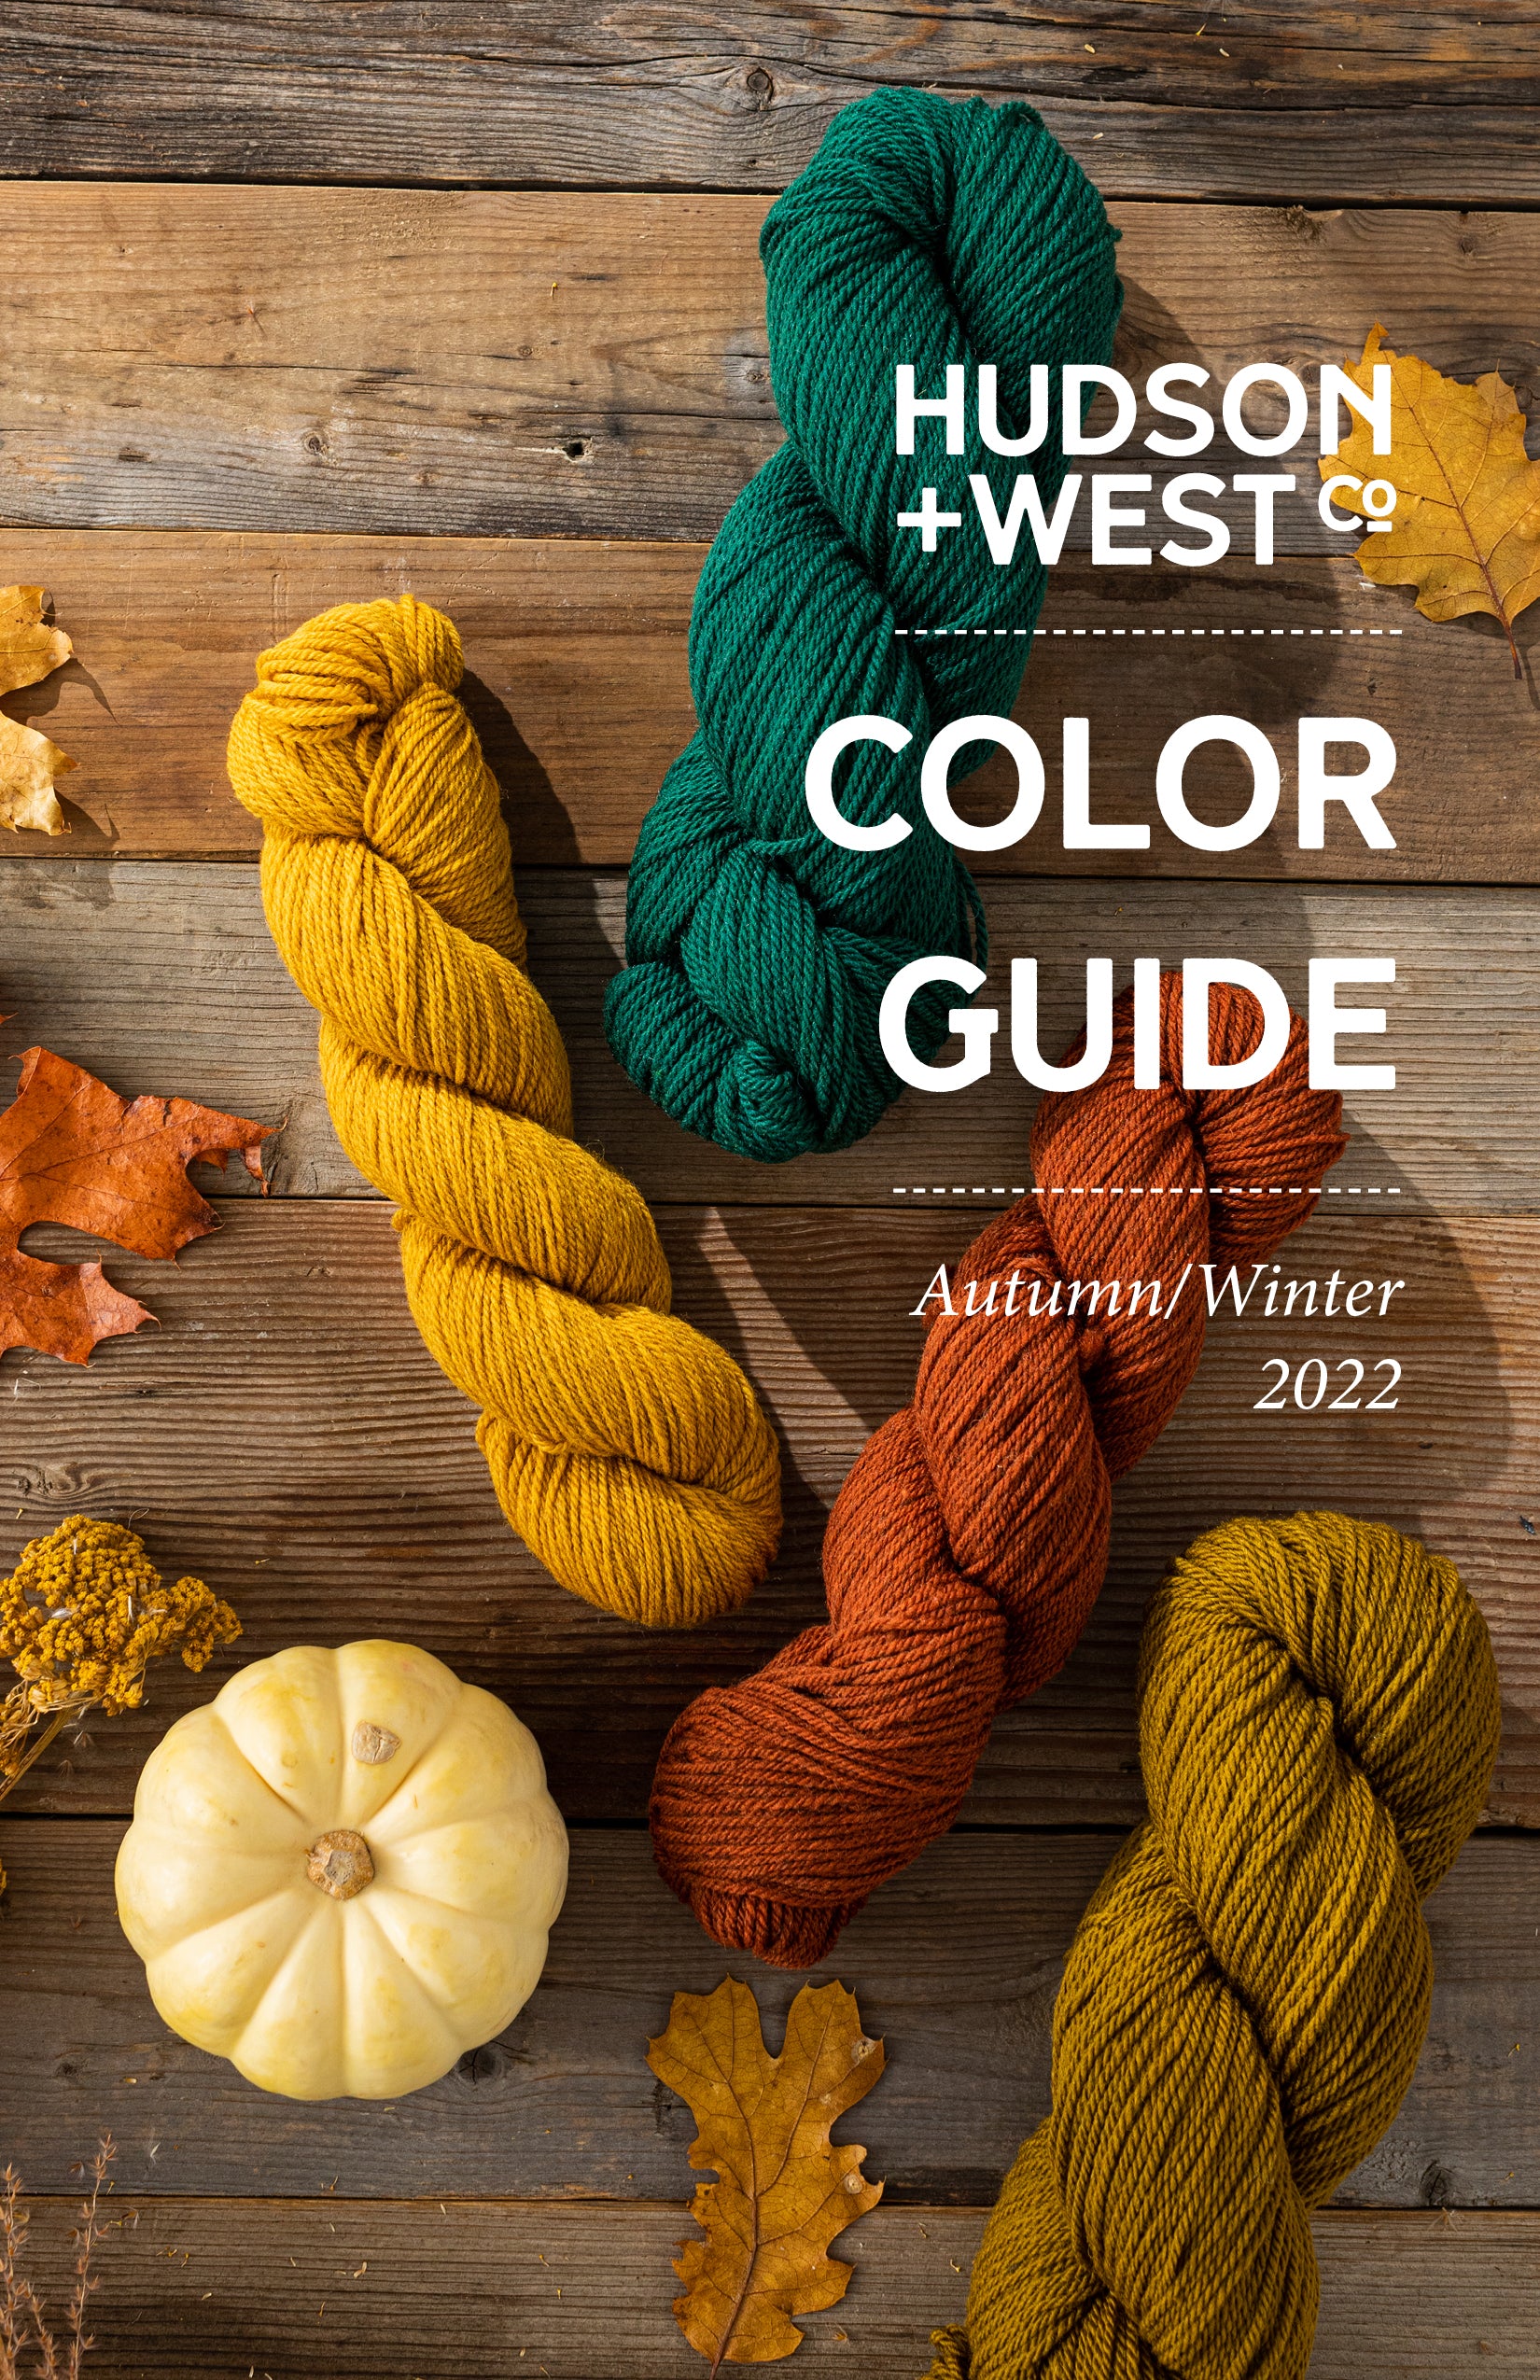 H+W Autumn/Winter 2022 Color Guide – Hudson and West Co